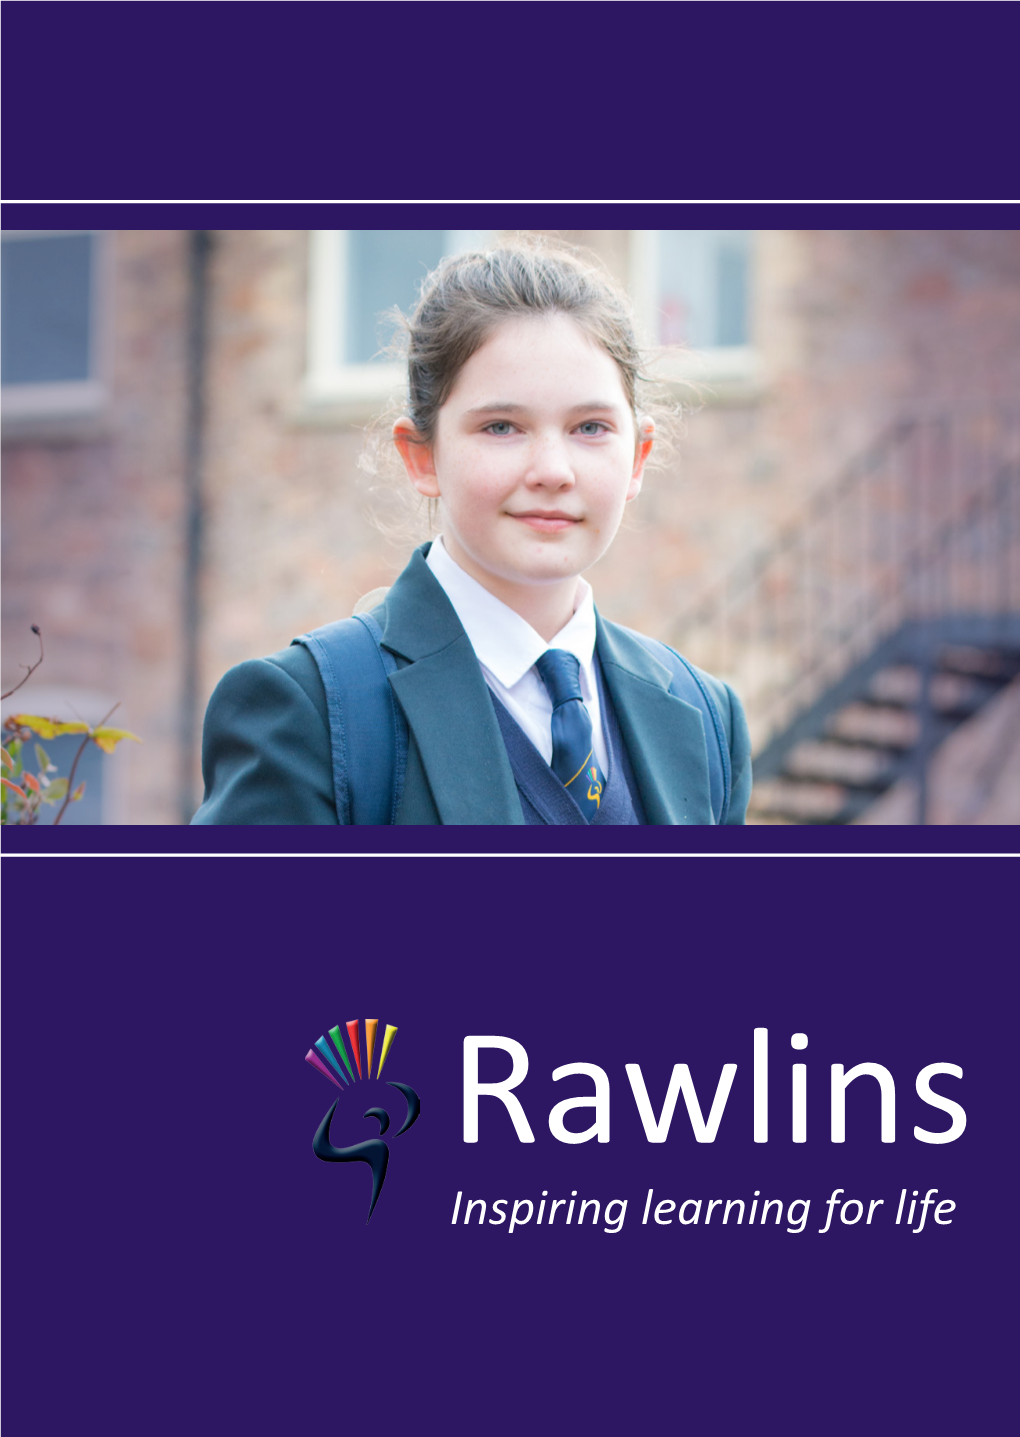 Inspiring Learning for Life Rawlins Inspiring Learning for Life an Inspirational Centre of Learning Where Students Excel “The Curriculum Is Very Broad